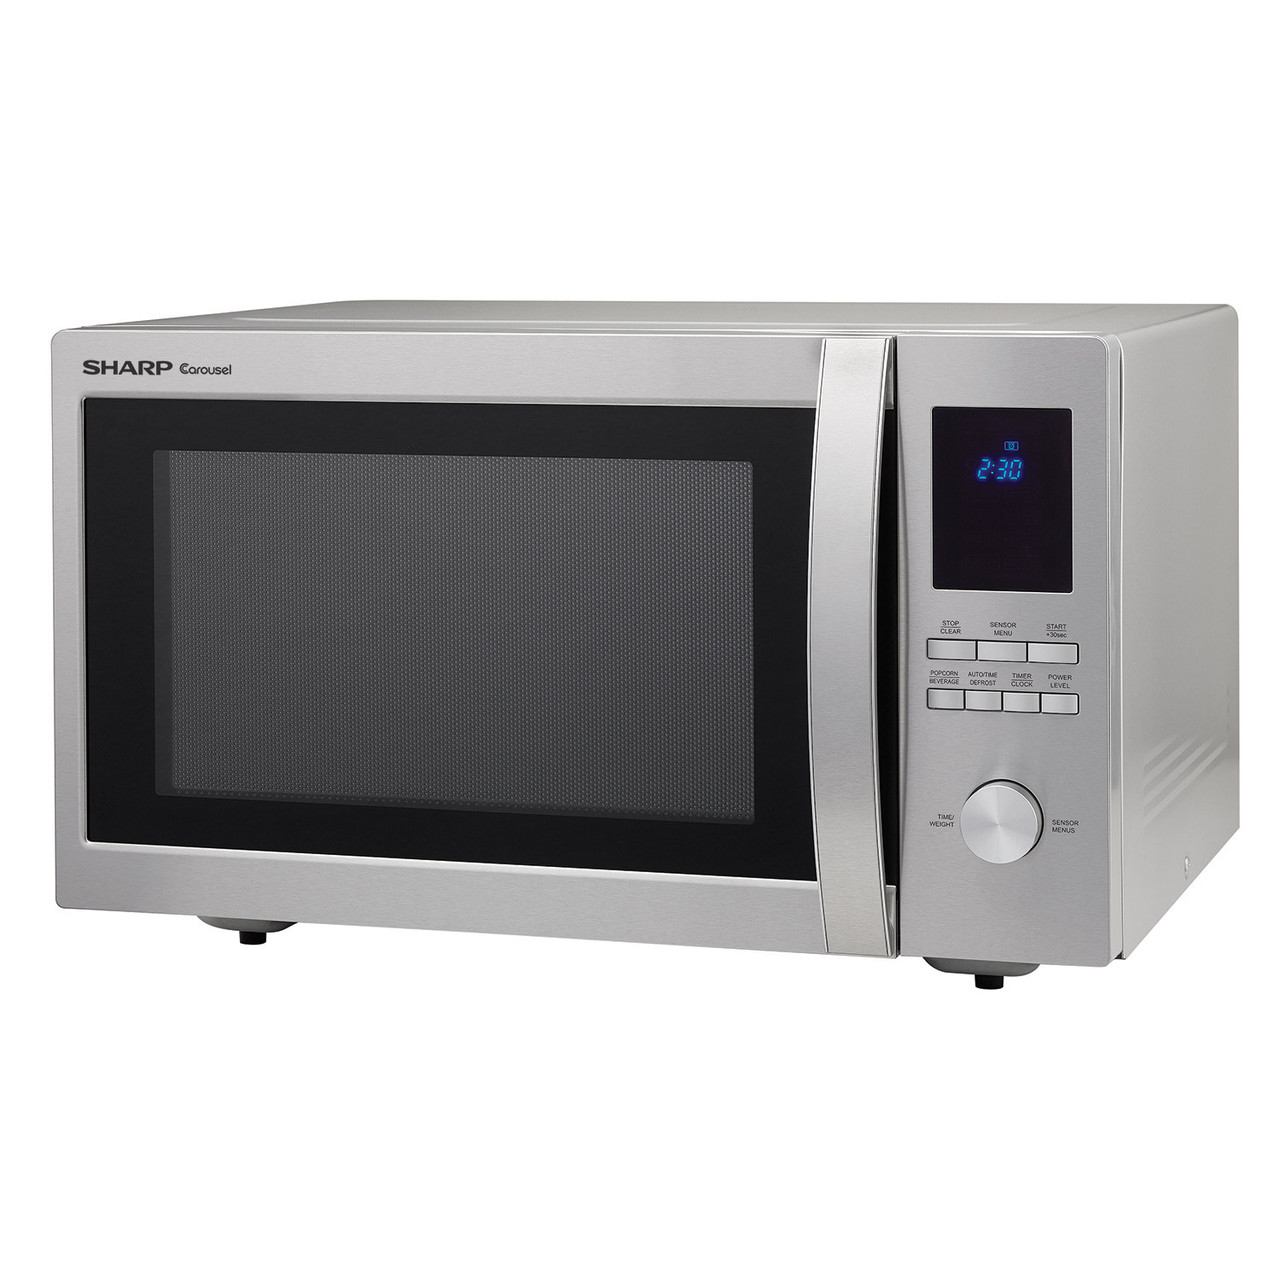 1.6 cu. ft. Sharp Stainless Steel Carousel Countertop Microwave (ZSMC1655BS) – left angle view